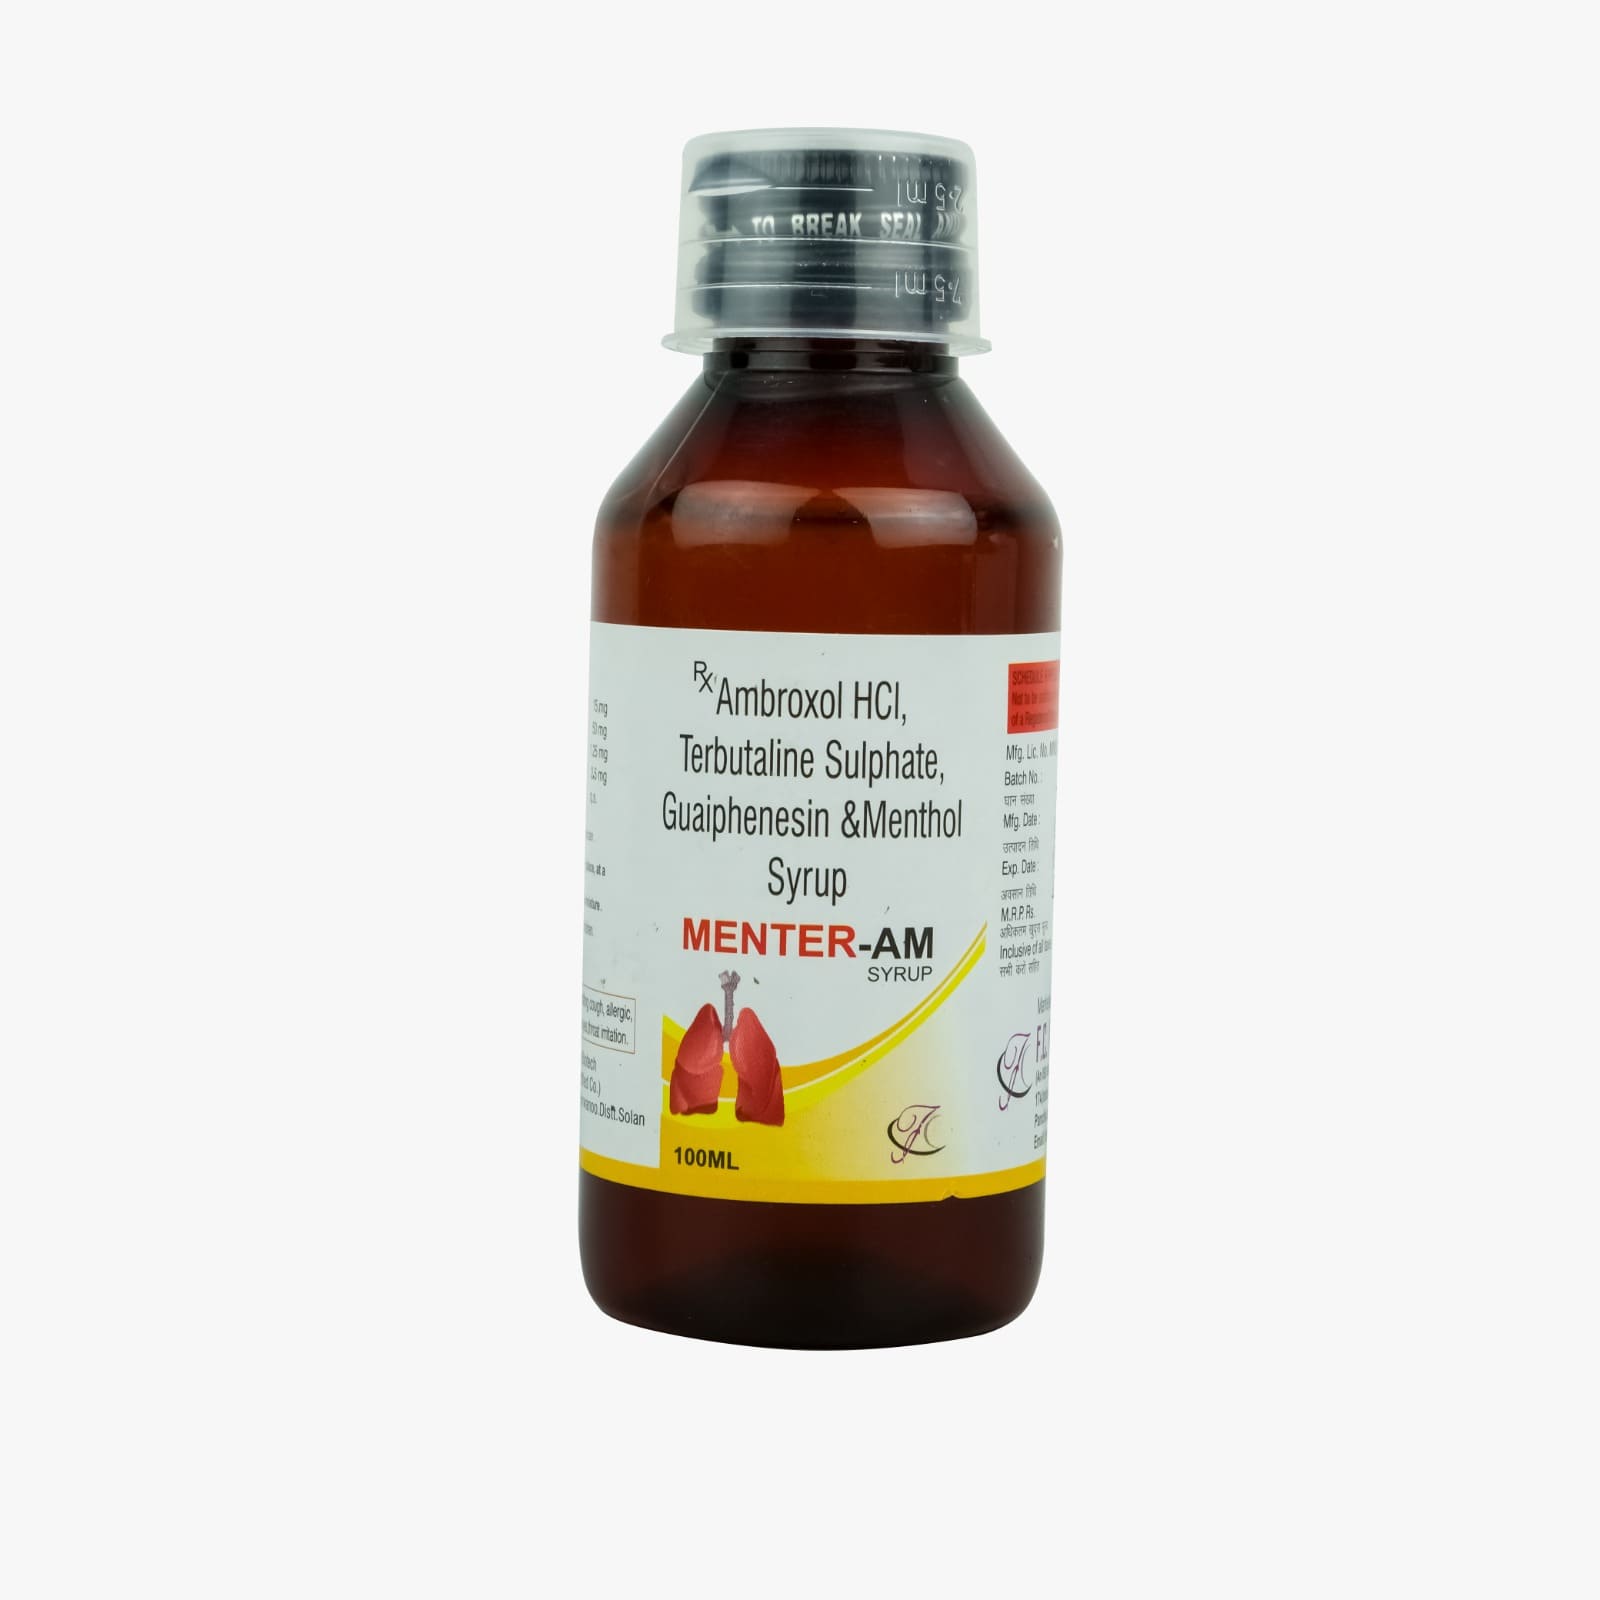 Ambroxol HCL Terbutaline Sulphate Guaiphenesin & Menthol Syrup